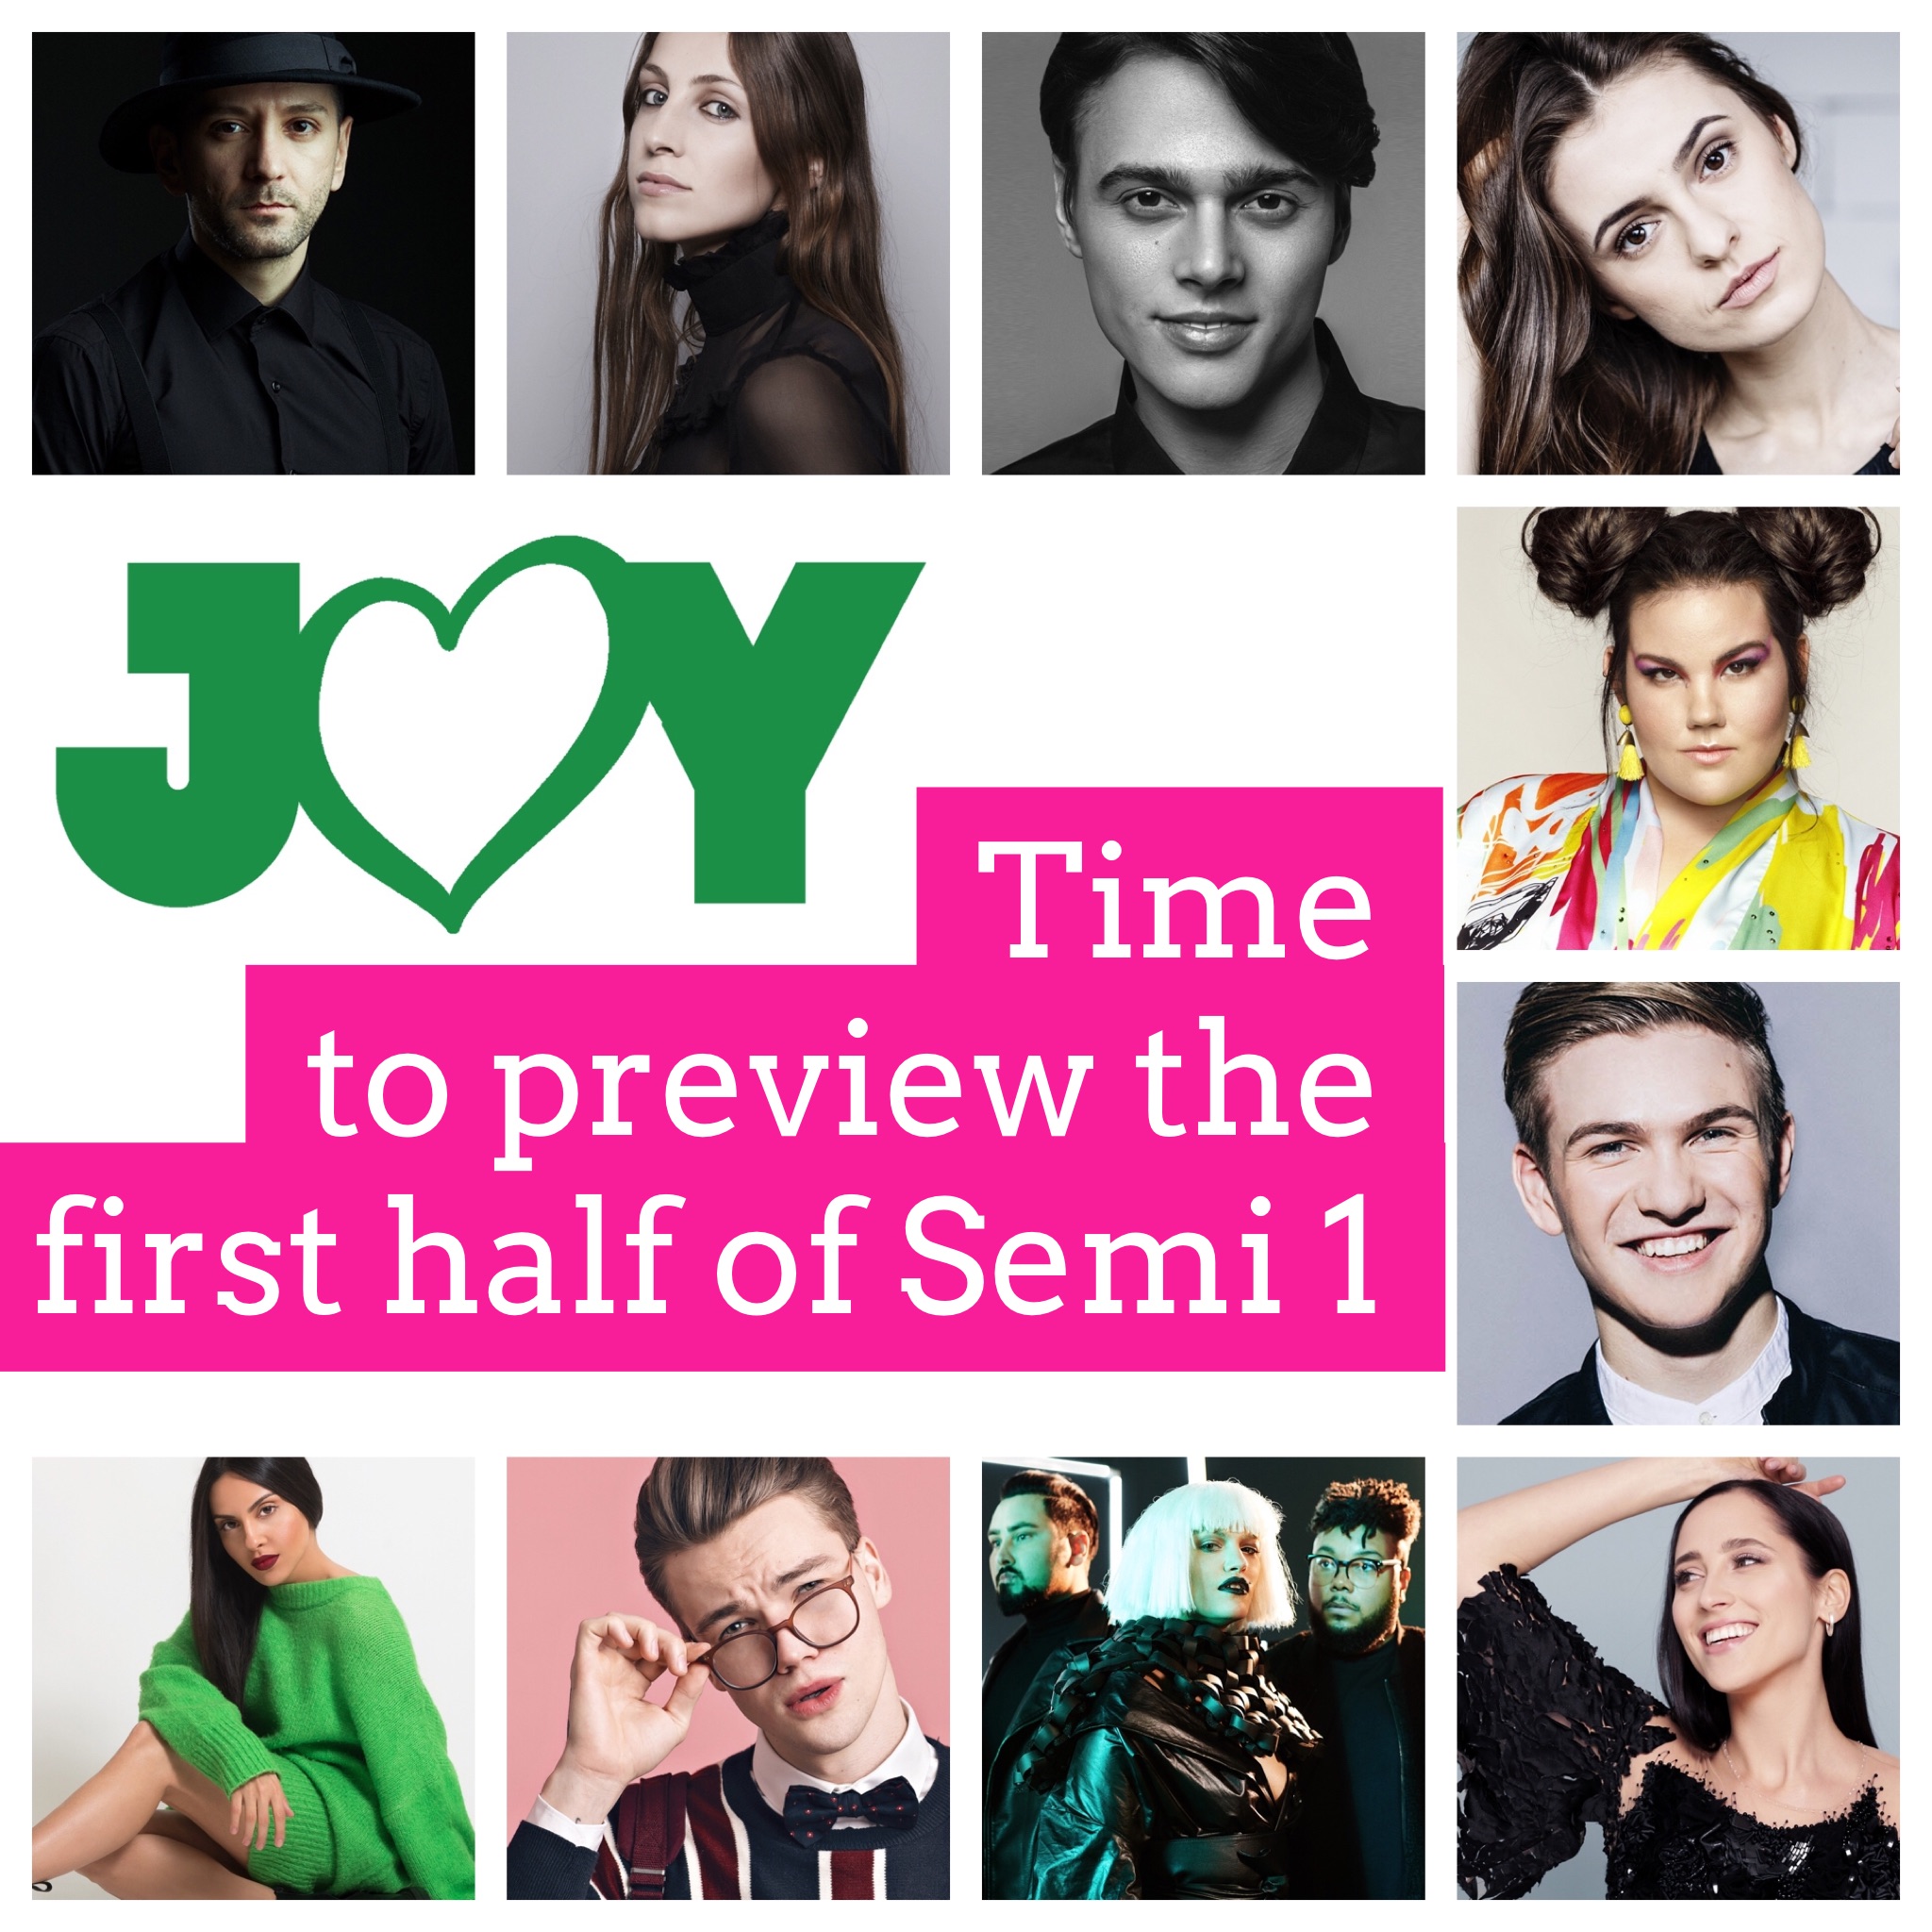 Eurovision 2018: Previewing the first half of Semi Final 1